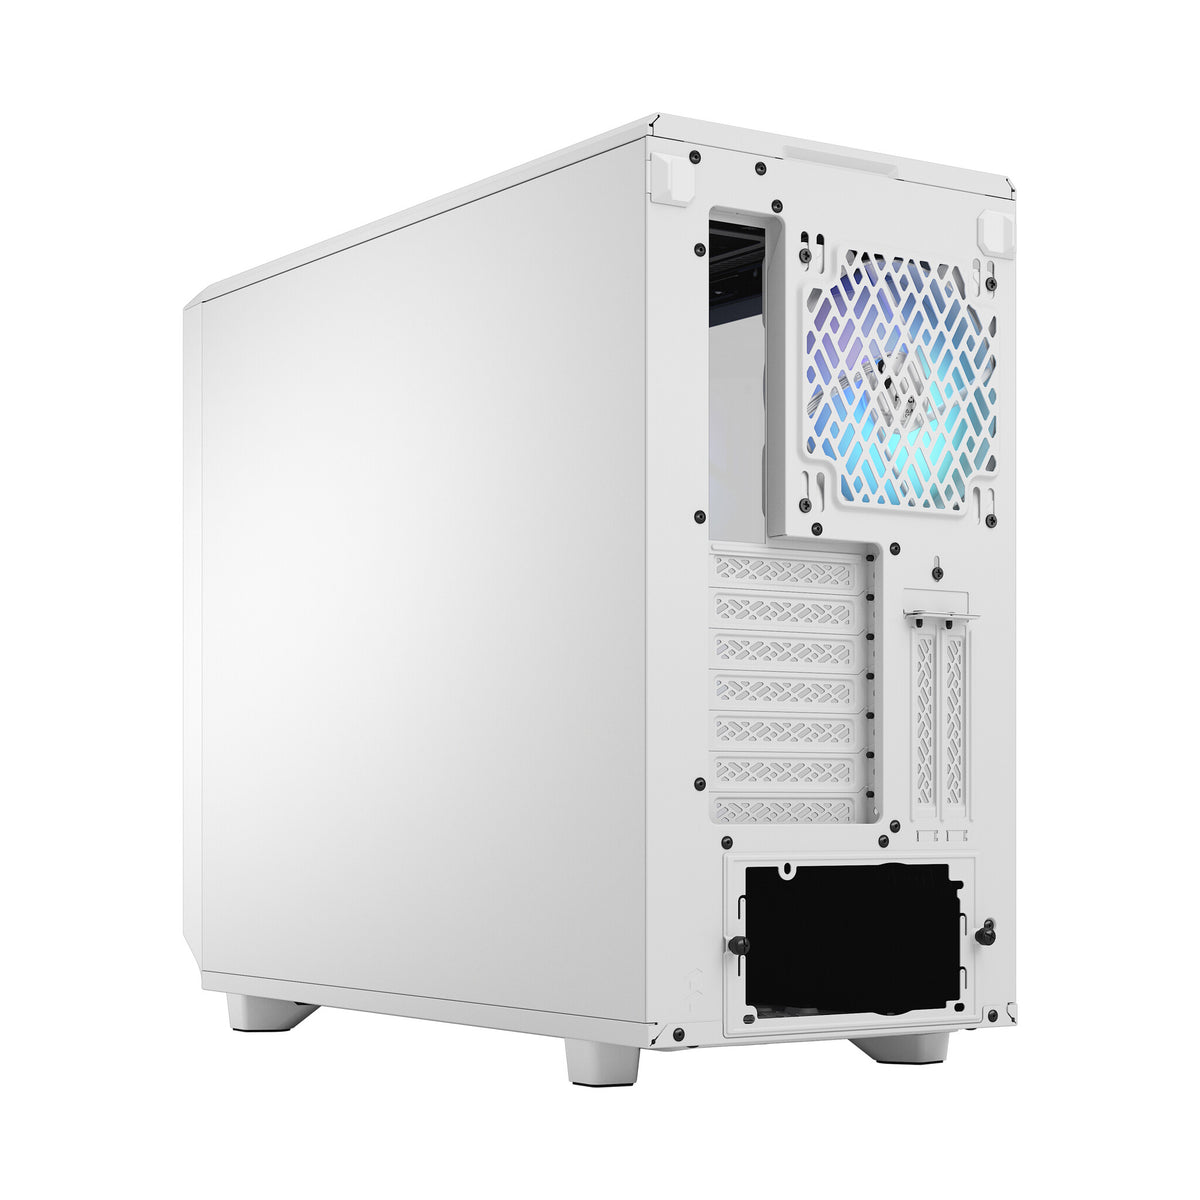 Fractal Design Meshify 2 RGB - ATX Mid Tower Case in White